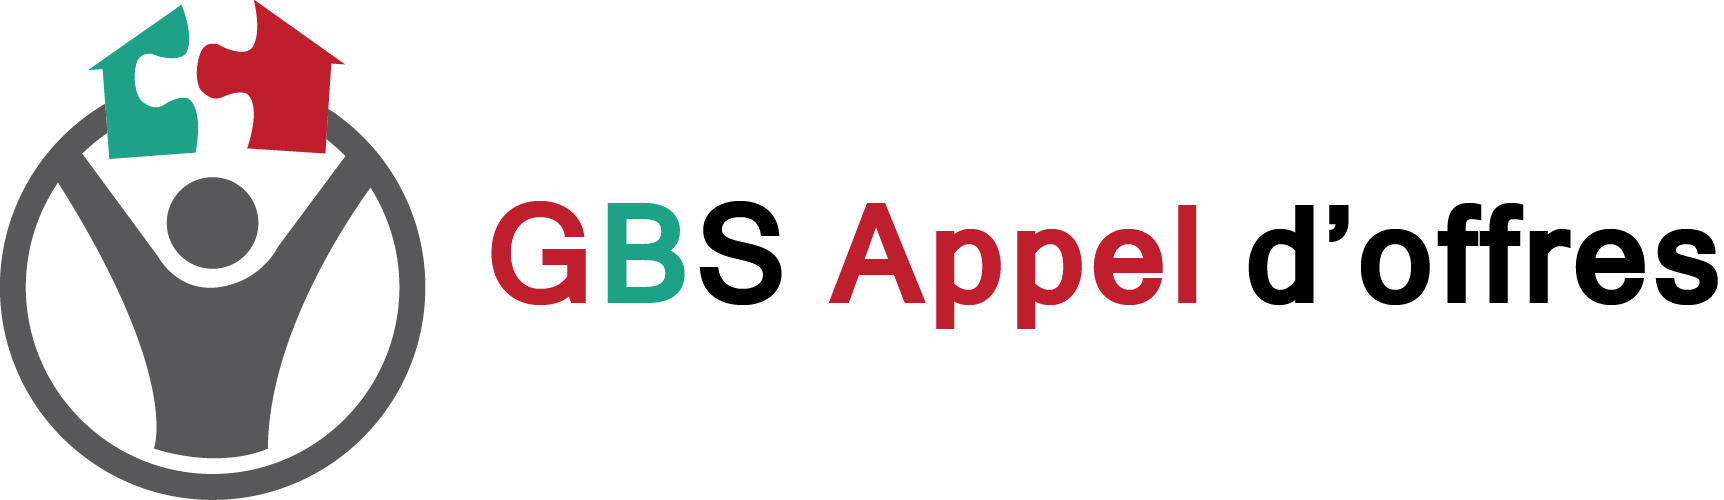 GBS Appel d'offres Growing Business Service - Logo